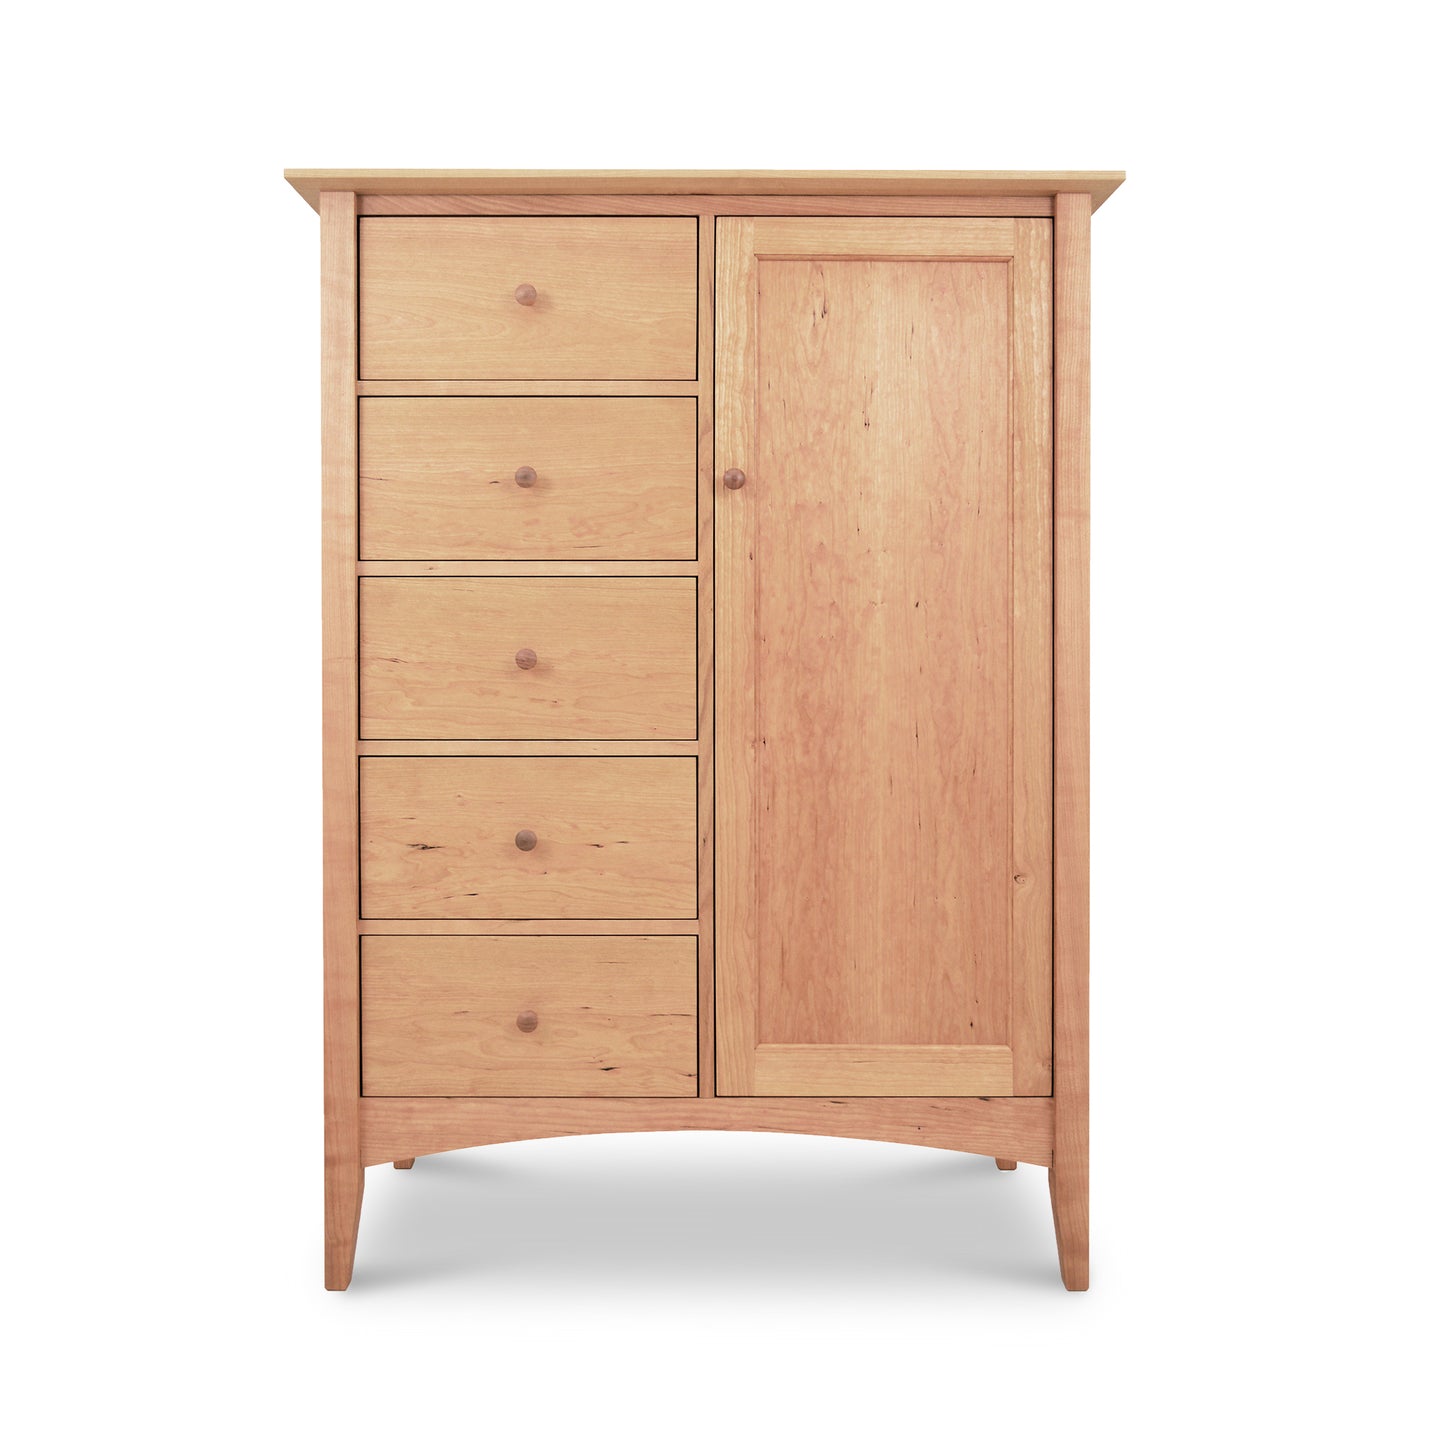 American Shaker Sweater Chest crafted with Vermont craftsmanship by Maple Corner Woodworks, featuring seven drawers on the left and a single cabinet door on the right, isolated on a white background.